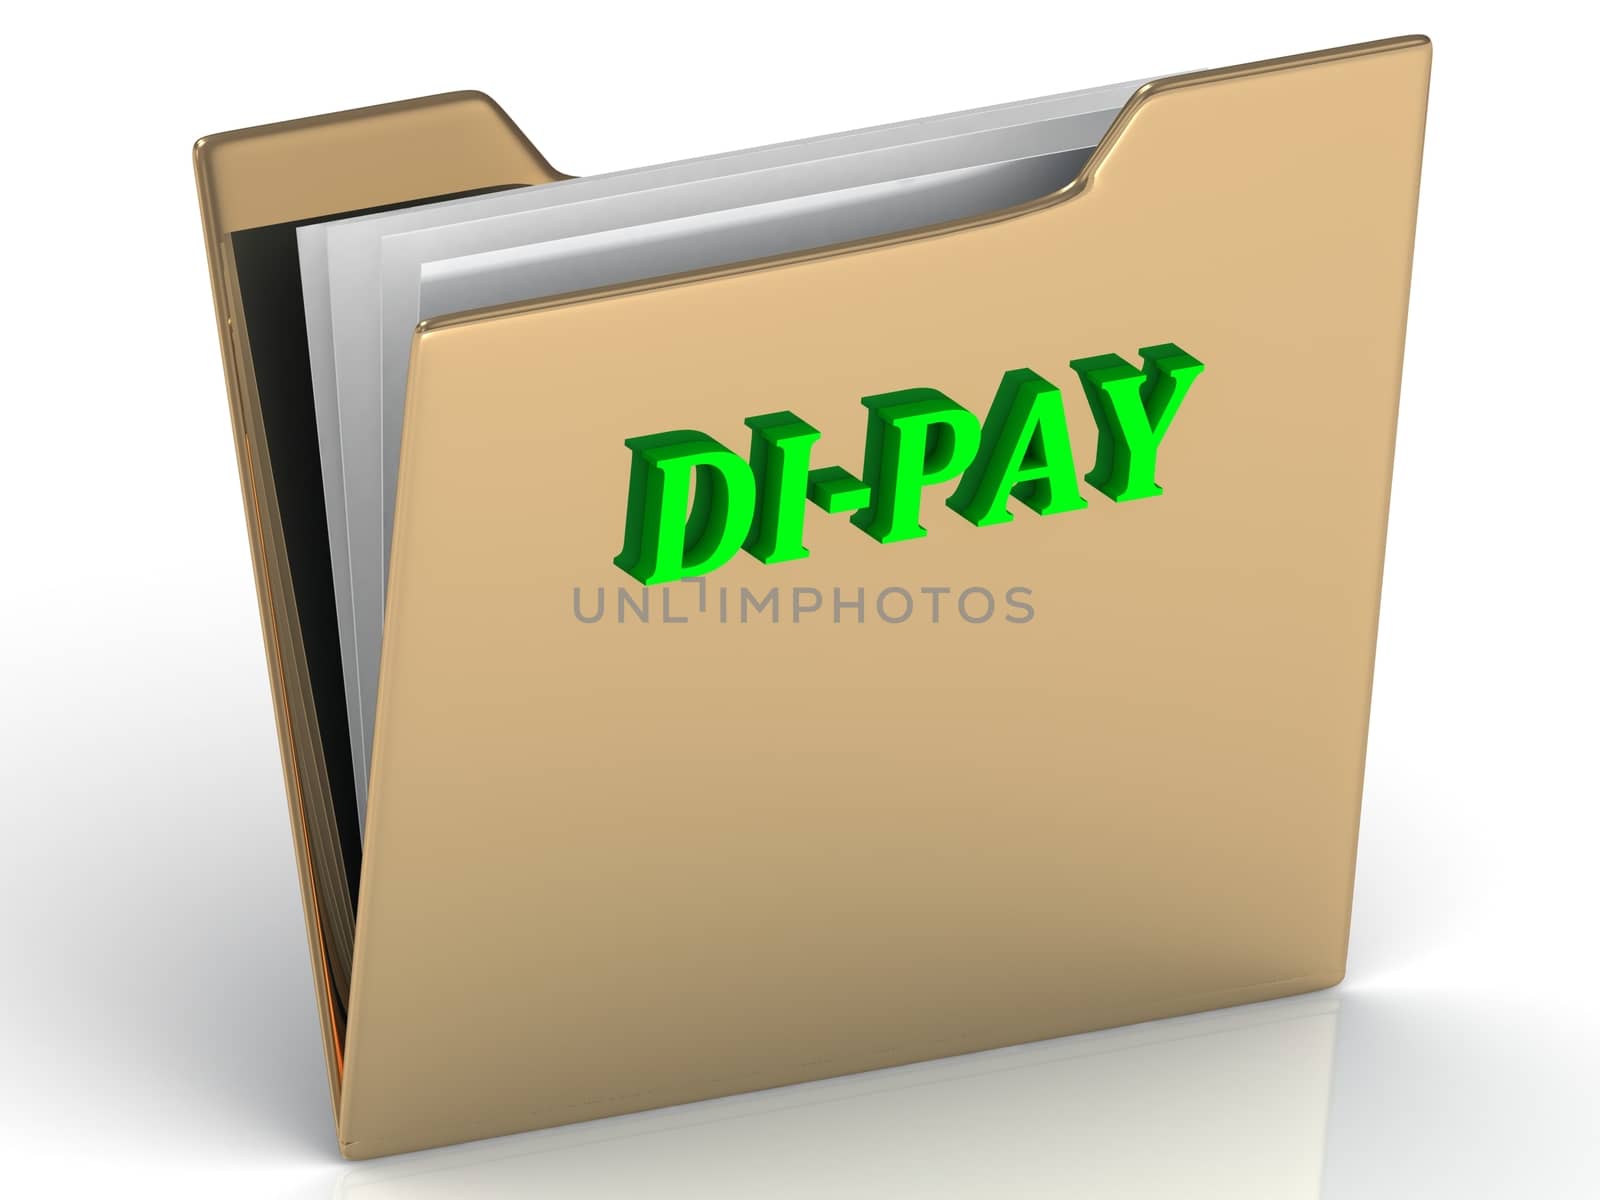 DI-PAY- bright color letters on a gold folder on a white background